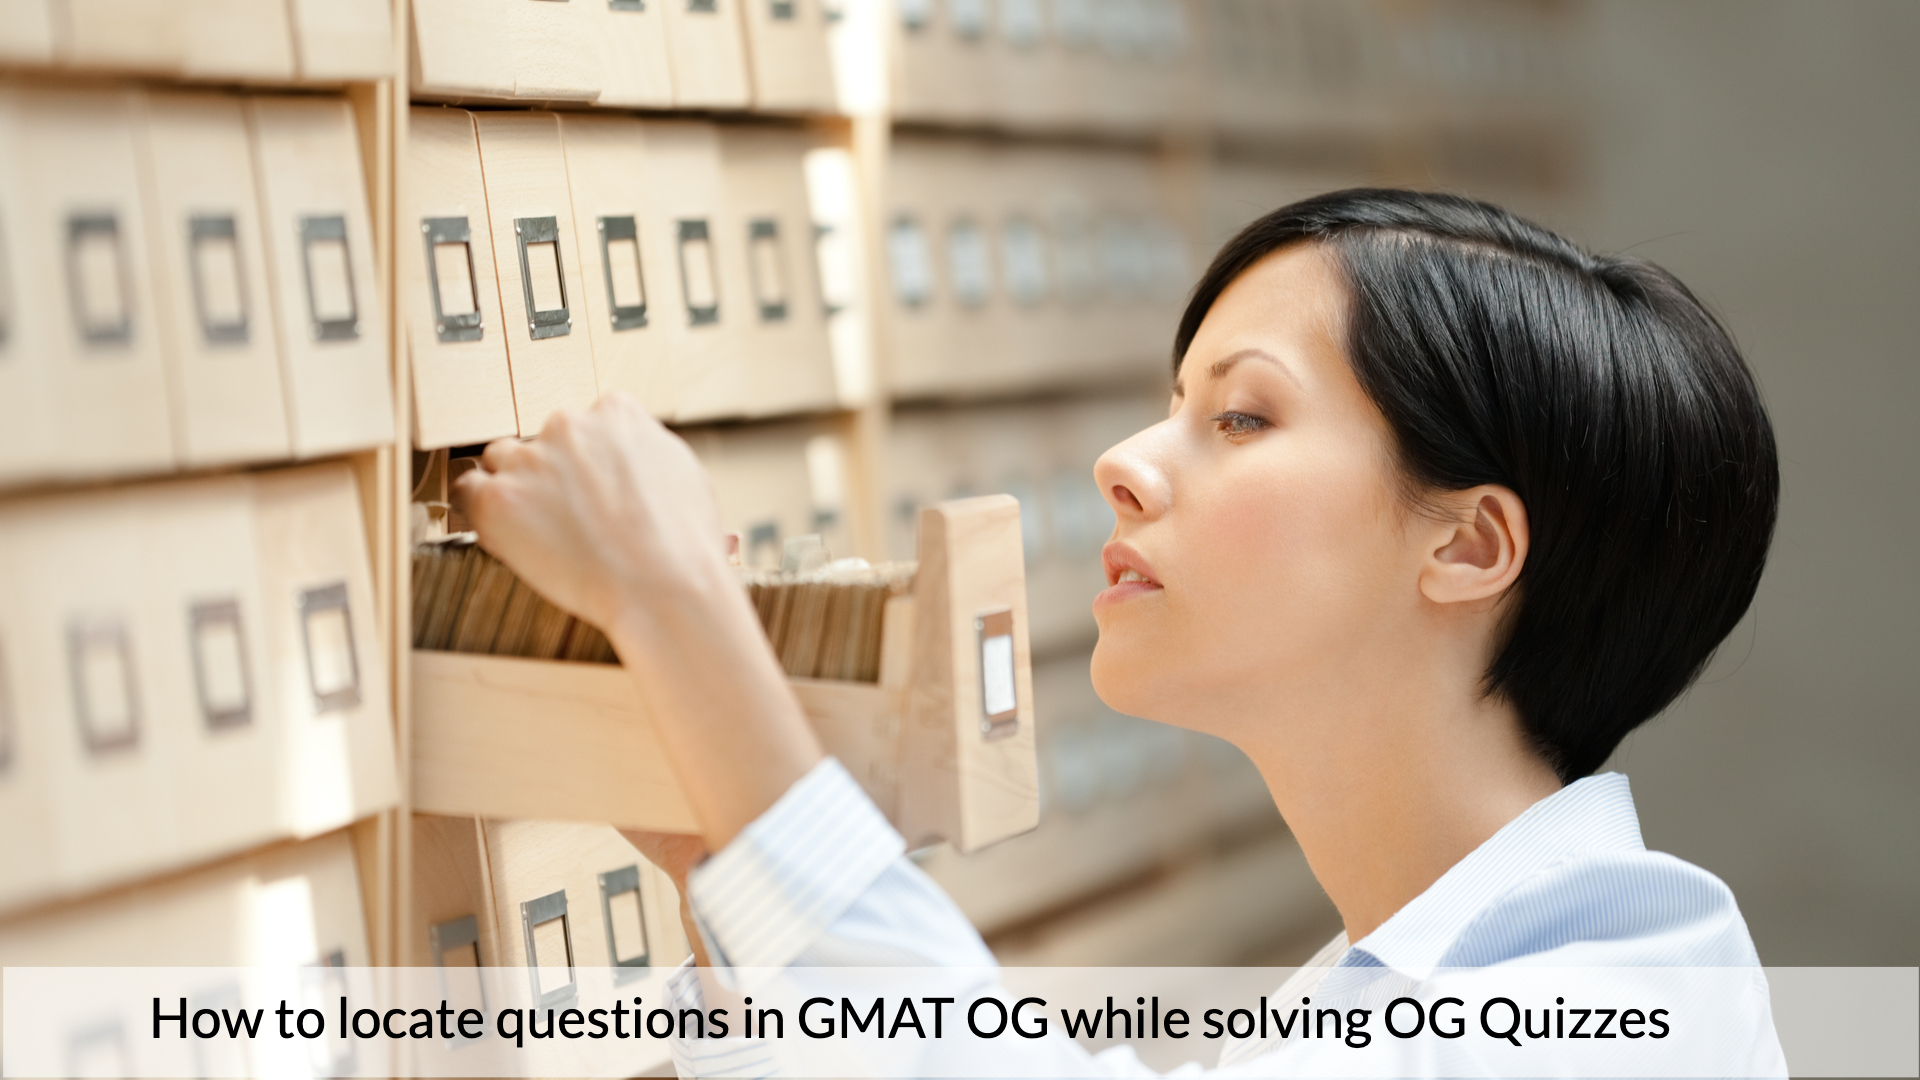 How to locate questions in the GMAT Official Guide while solving OG quizzes